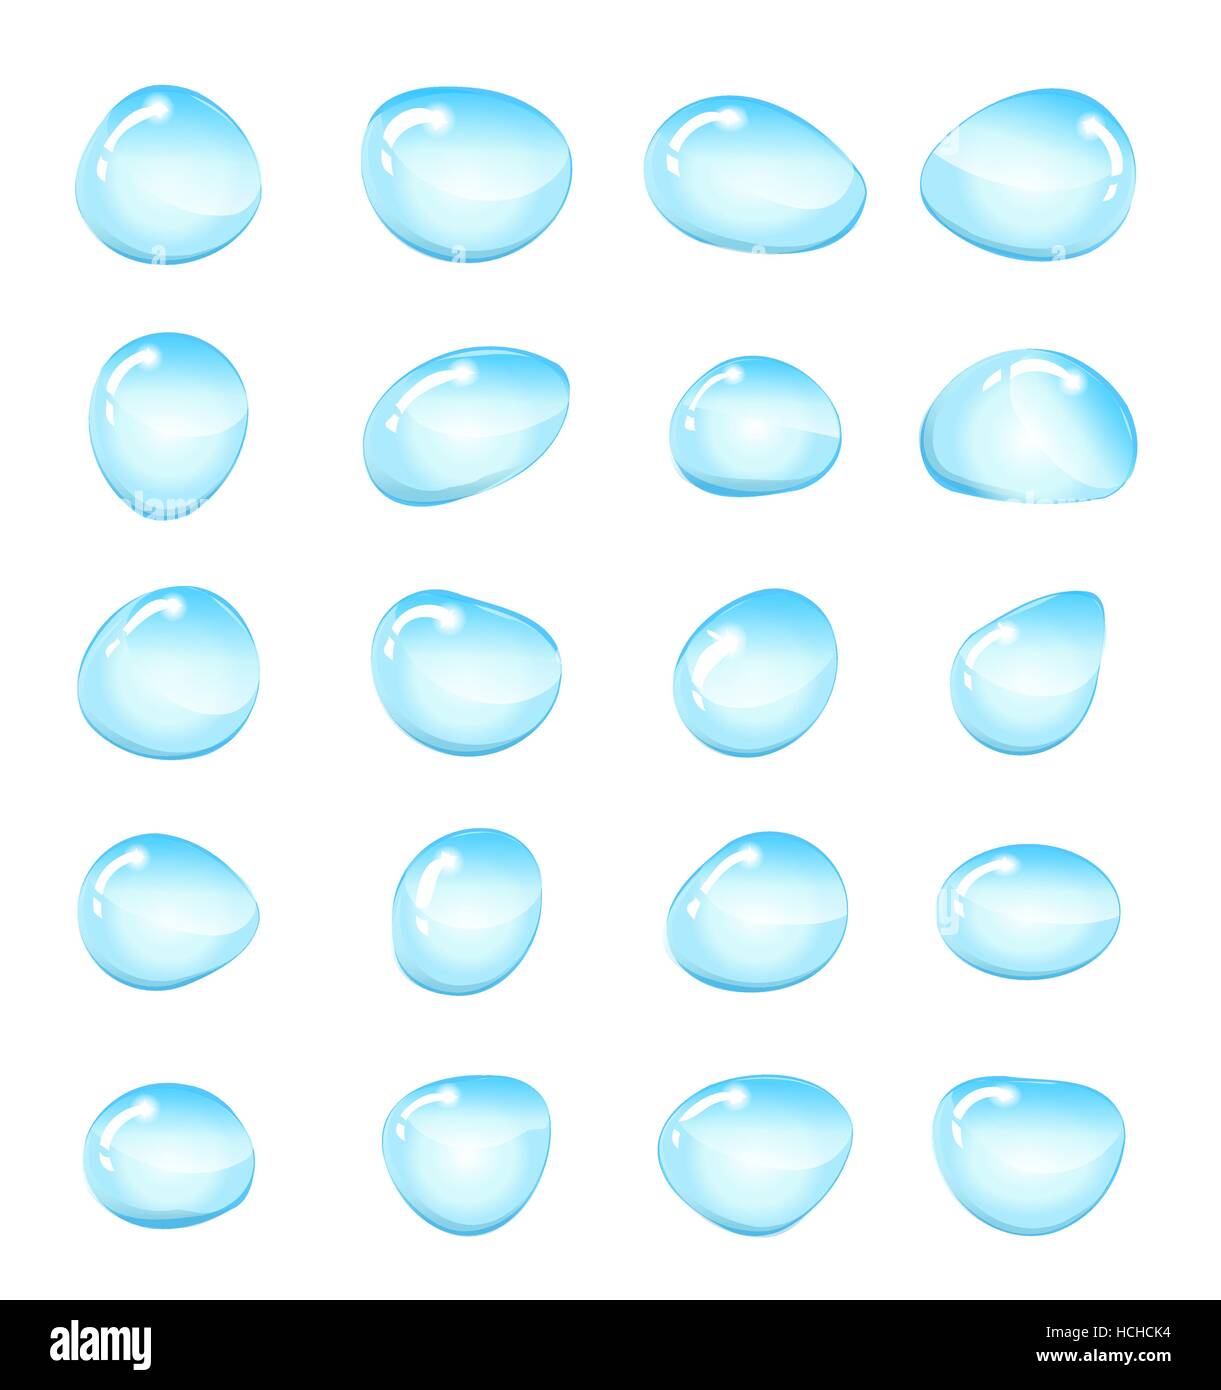 Water drops, splashes set. Raindrops isolated on white background. Cartoon drop different shapes. Vector illustration, clip art. Stock Vector